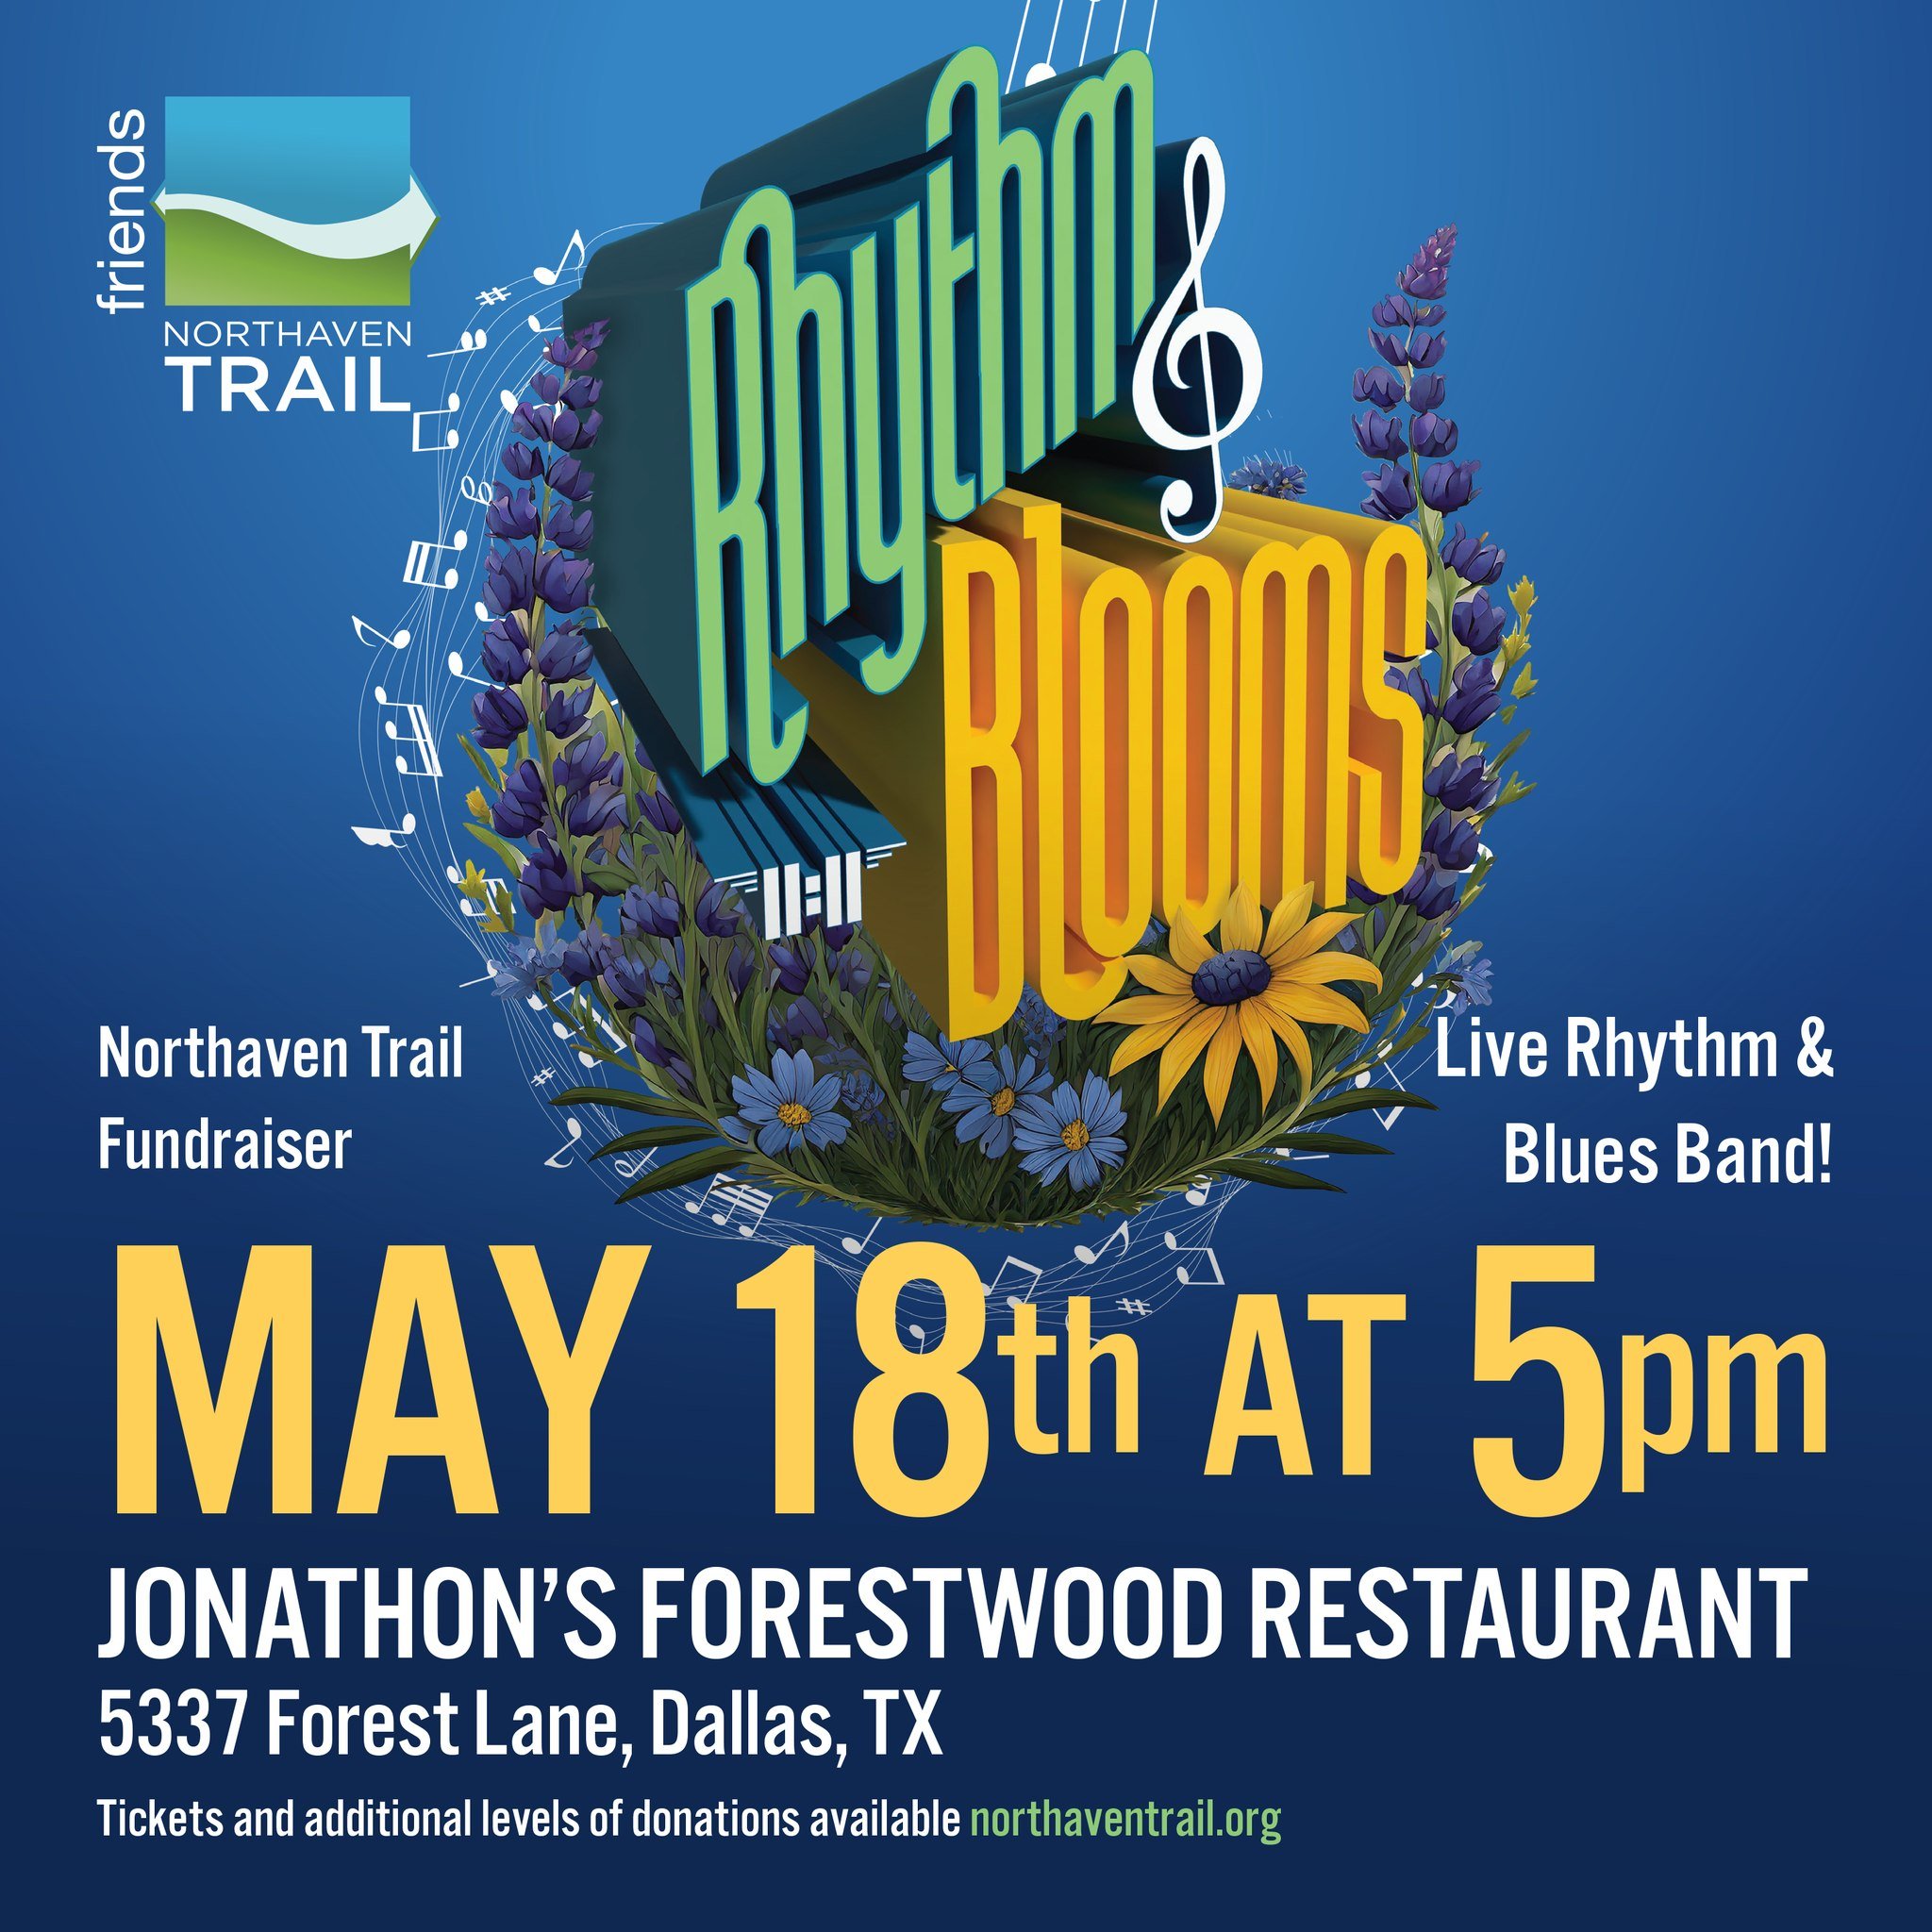 Join us for our first adults only fundraiser featuring live music and free appetizers. Cash bar. Get your tickets today! (link in bio) https://northaventrail.org/events/2024/5/18/rhythm-and-blooms